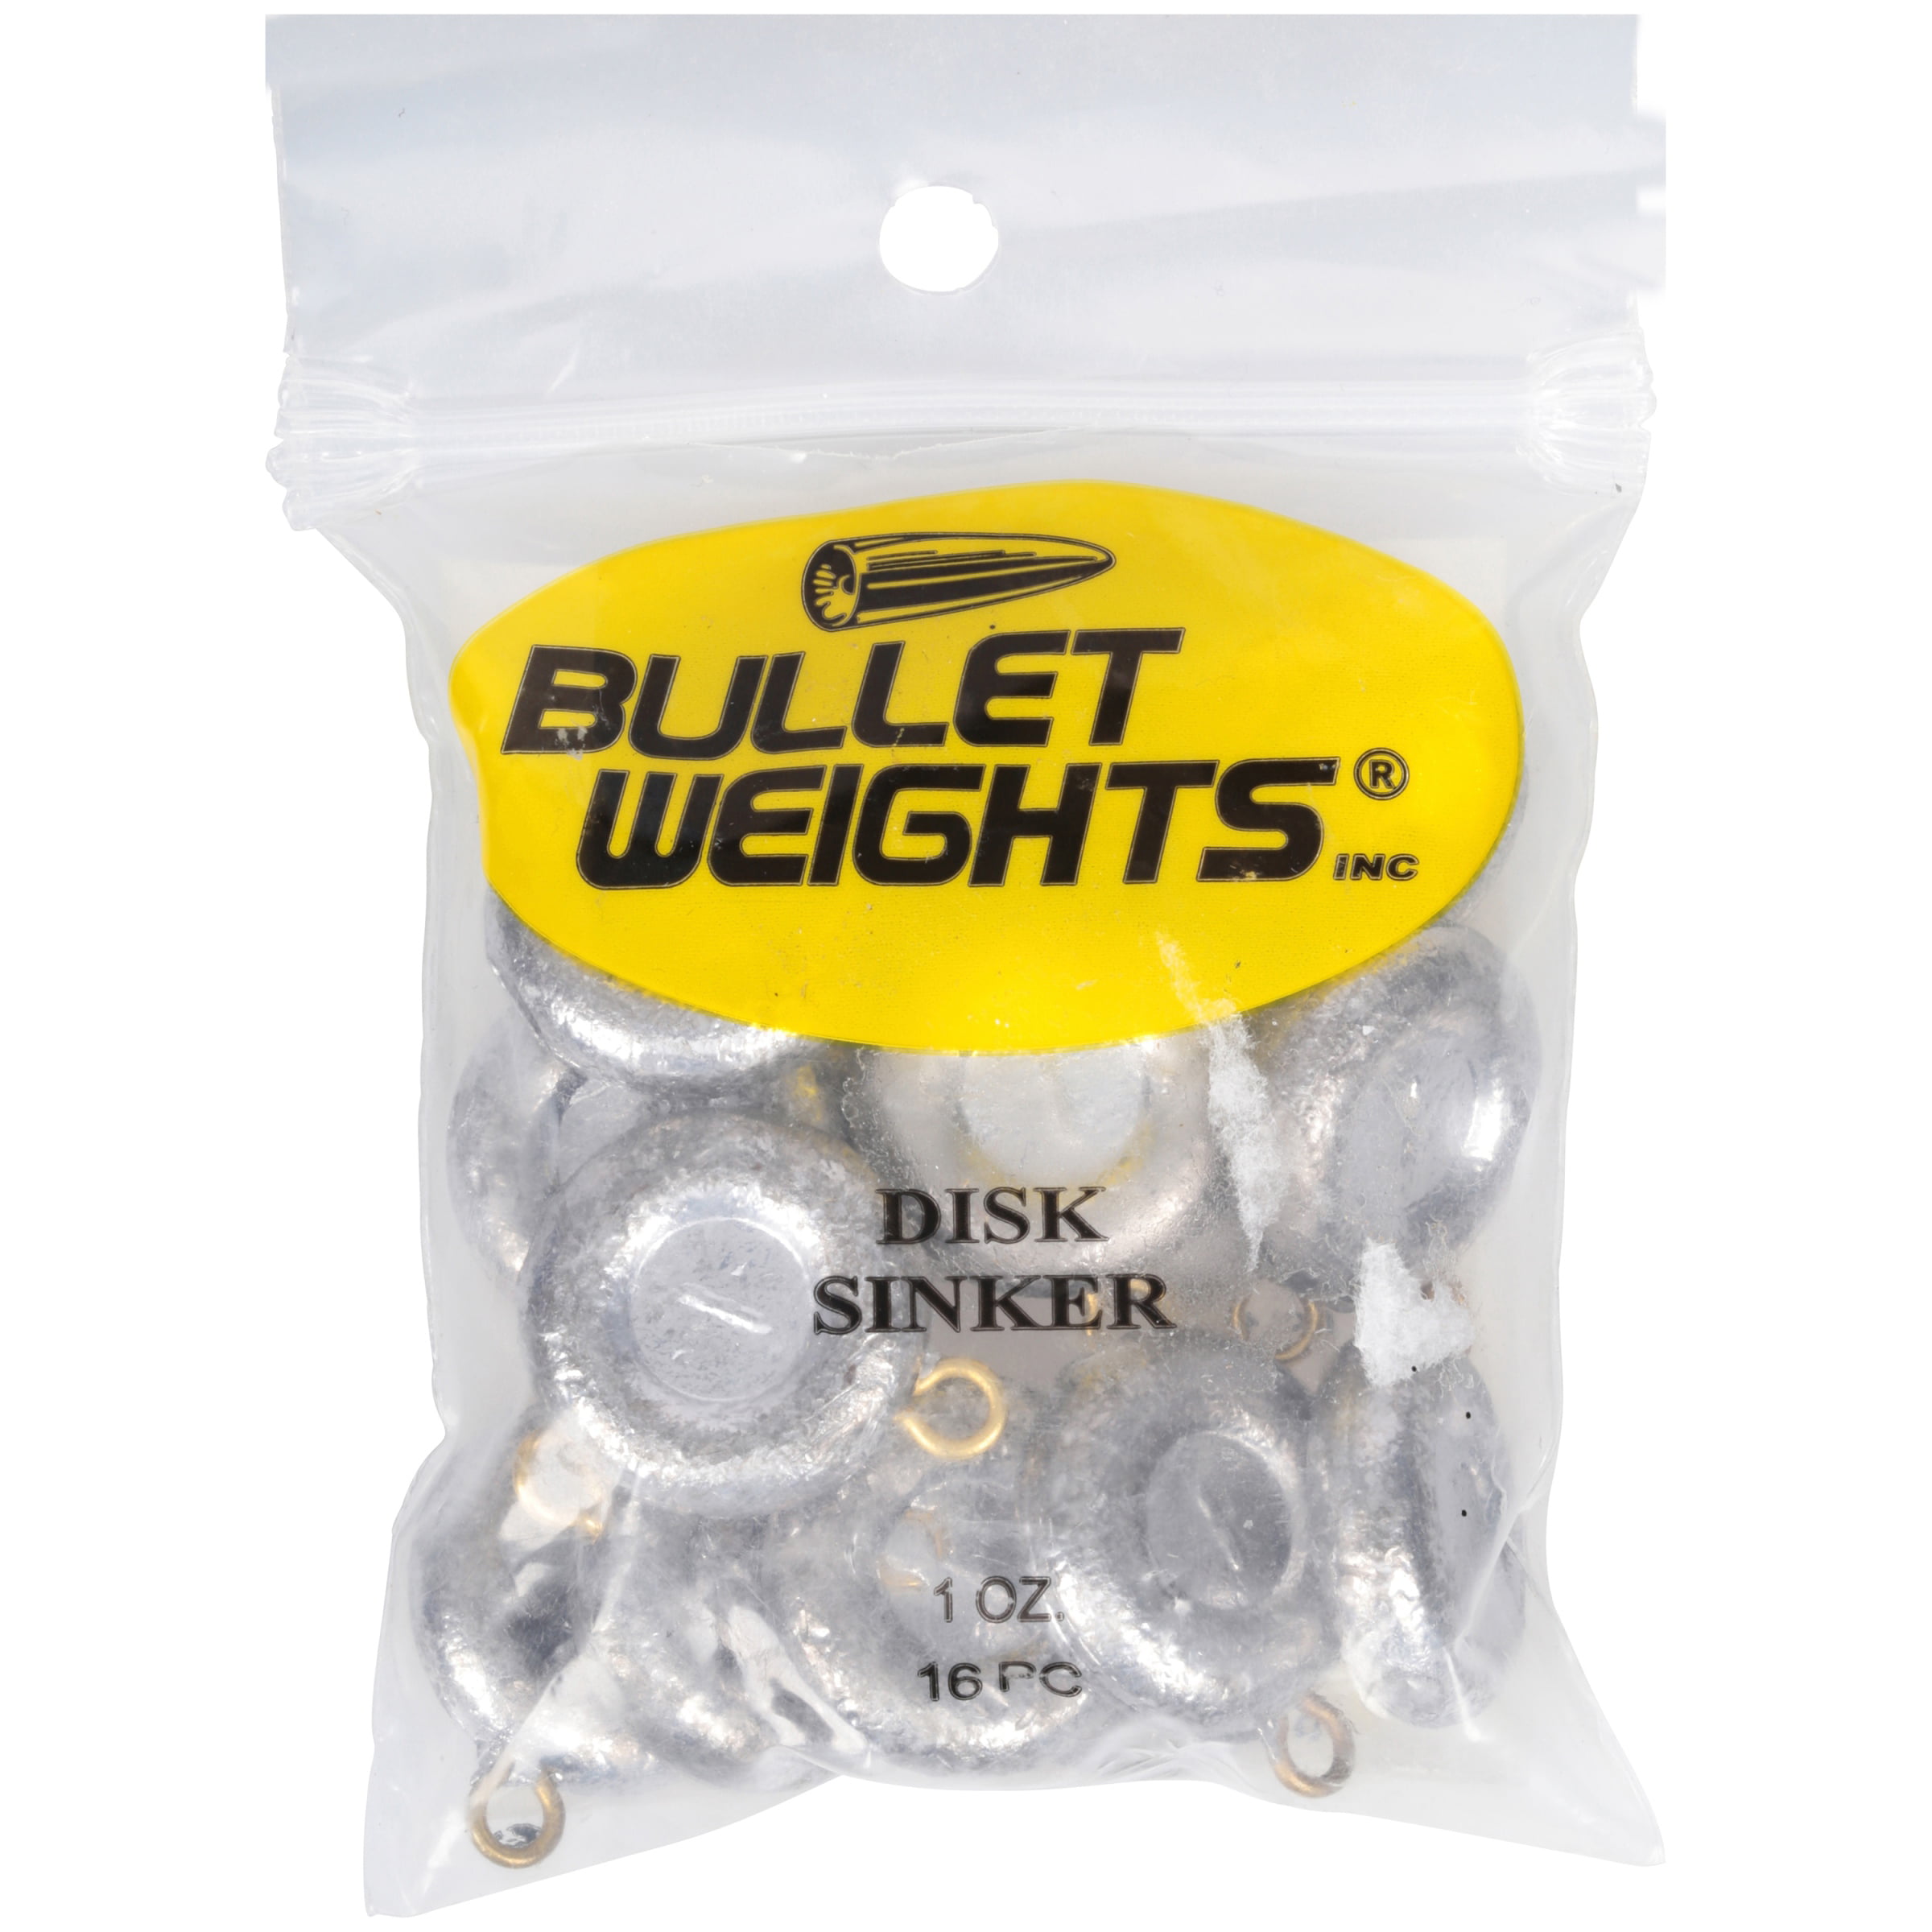 Bullet Weights® DSI1-24 Lead Disc Sinker Size 1 oz Fishing Weights